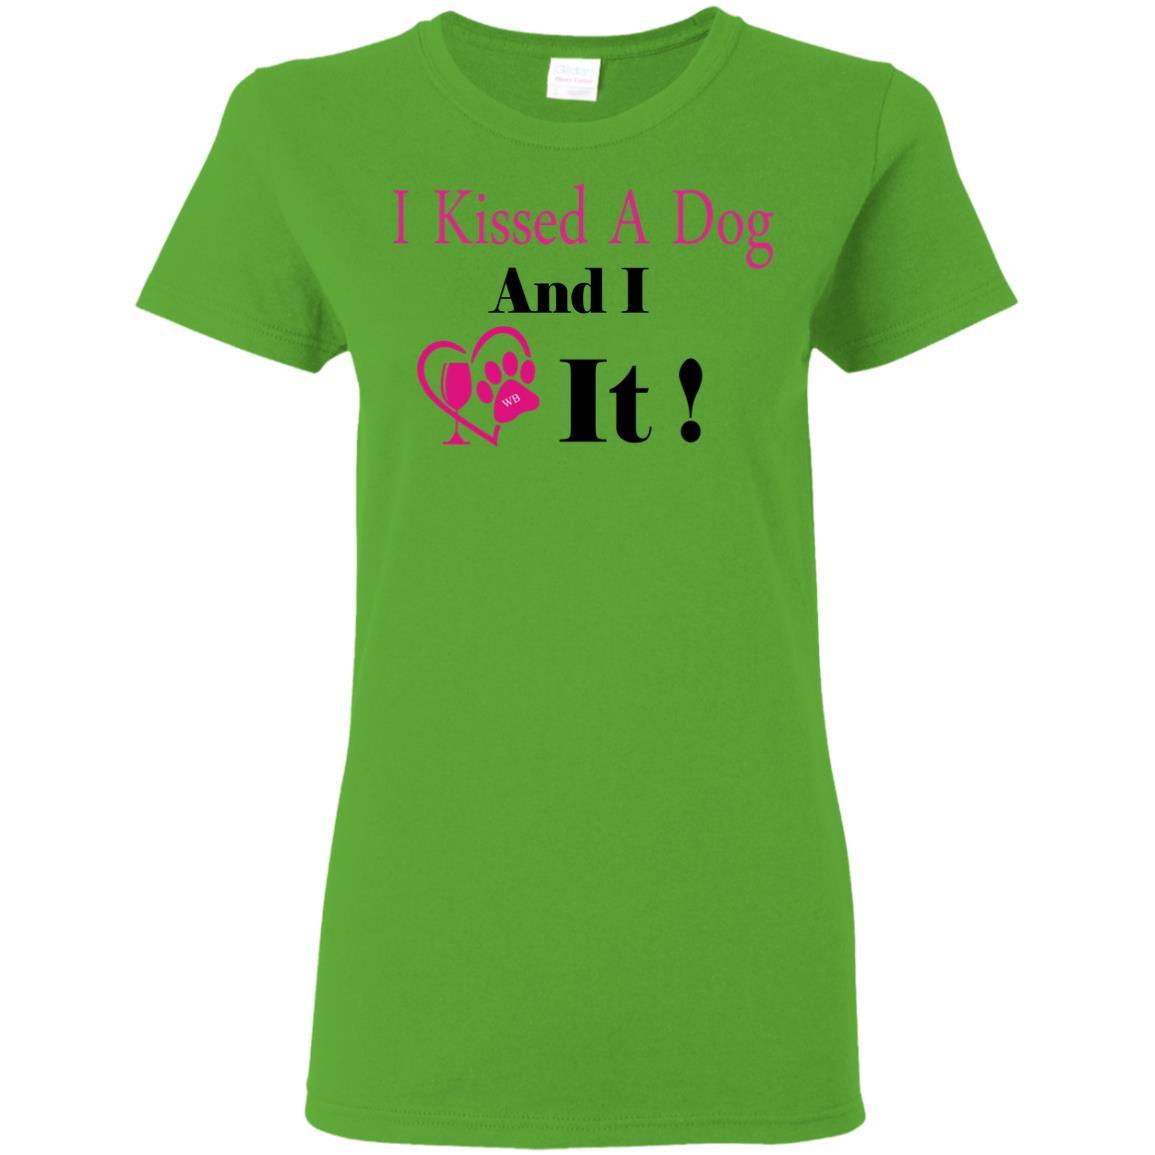 T-Shirts Electric Green / S WineyBitches.co "I Kissed A Dog And I Loved It:" Ladies' 5.3 oz. T-Shirt WineyBitchesCo